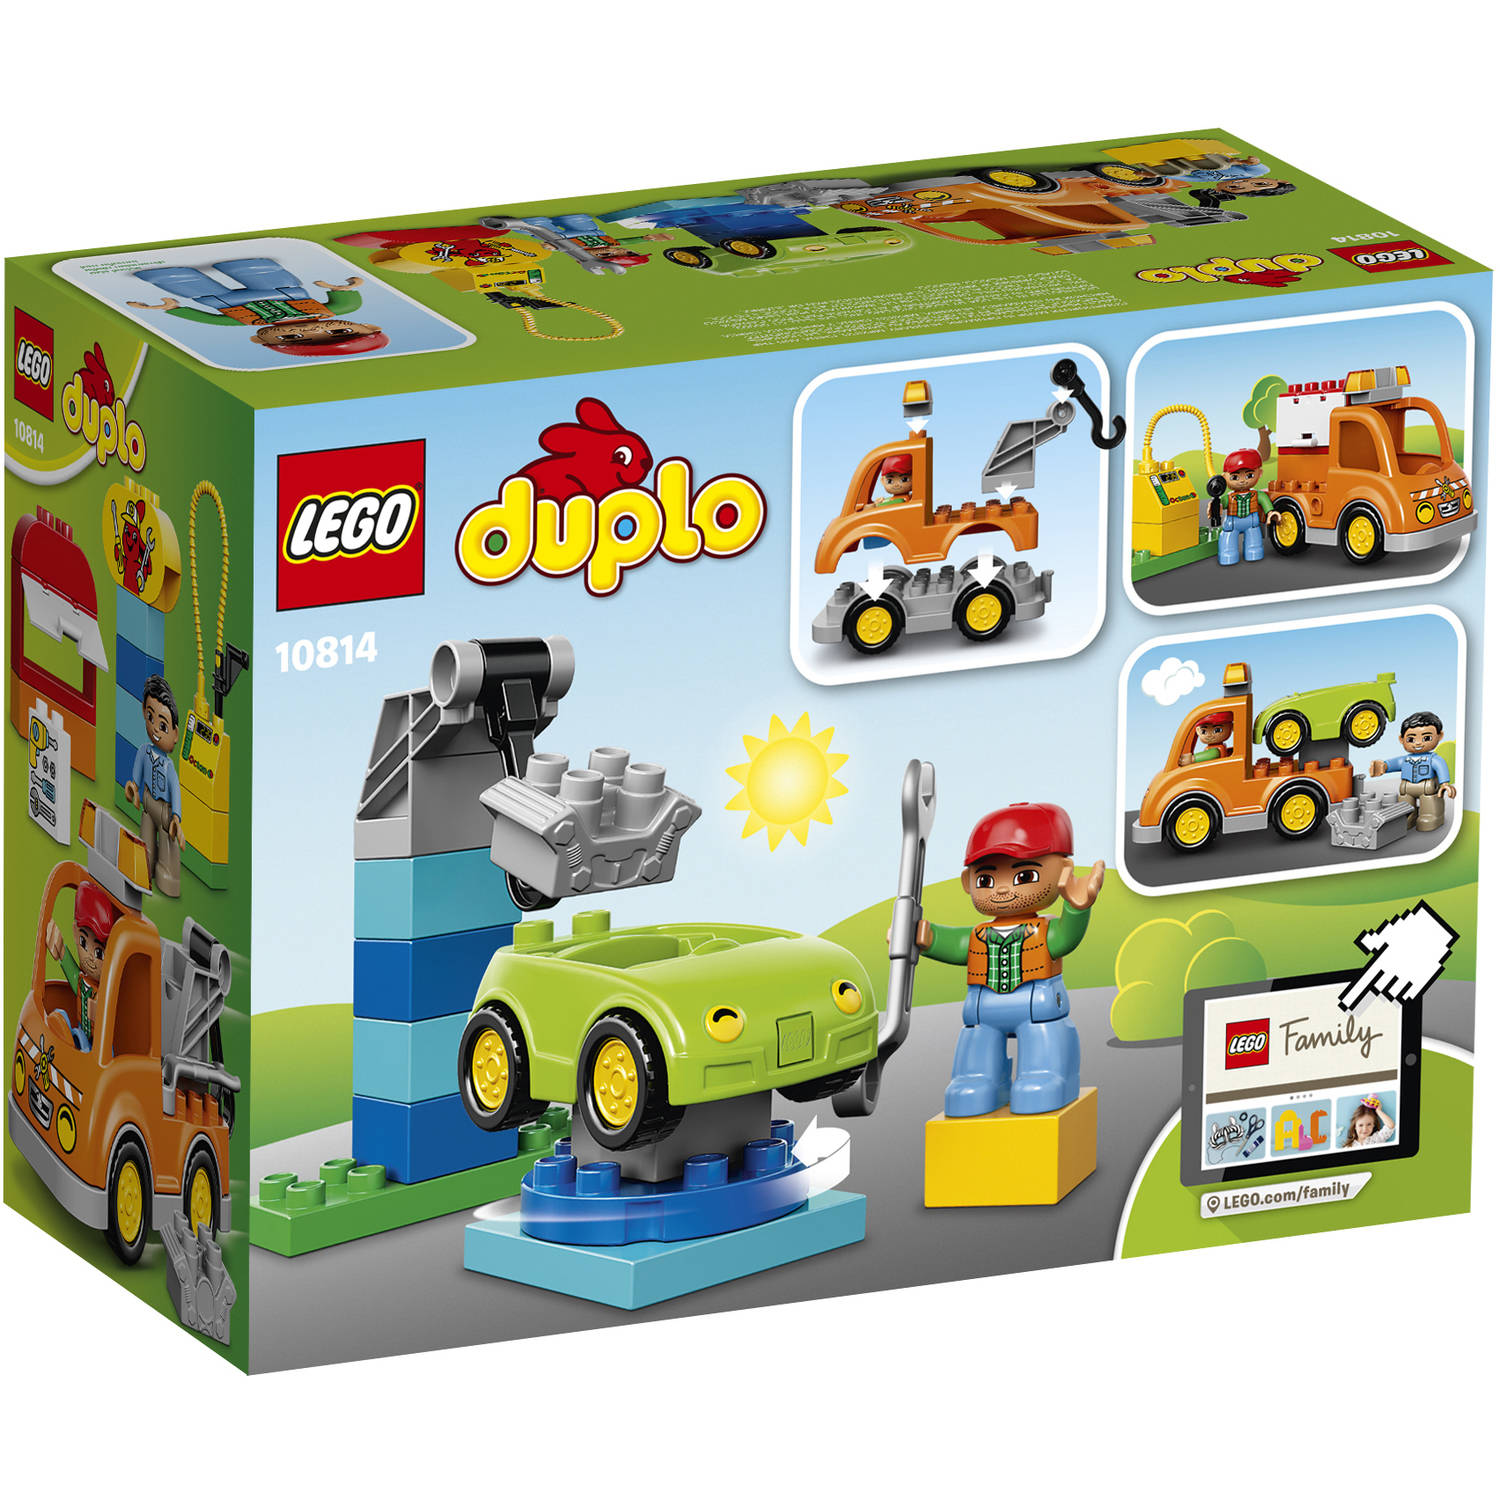 LEGO DUPLO Town Tow Truck, 10814 - image 3 of 6